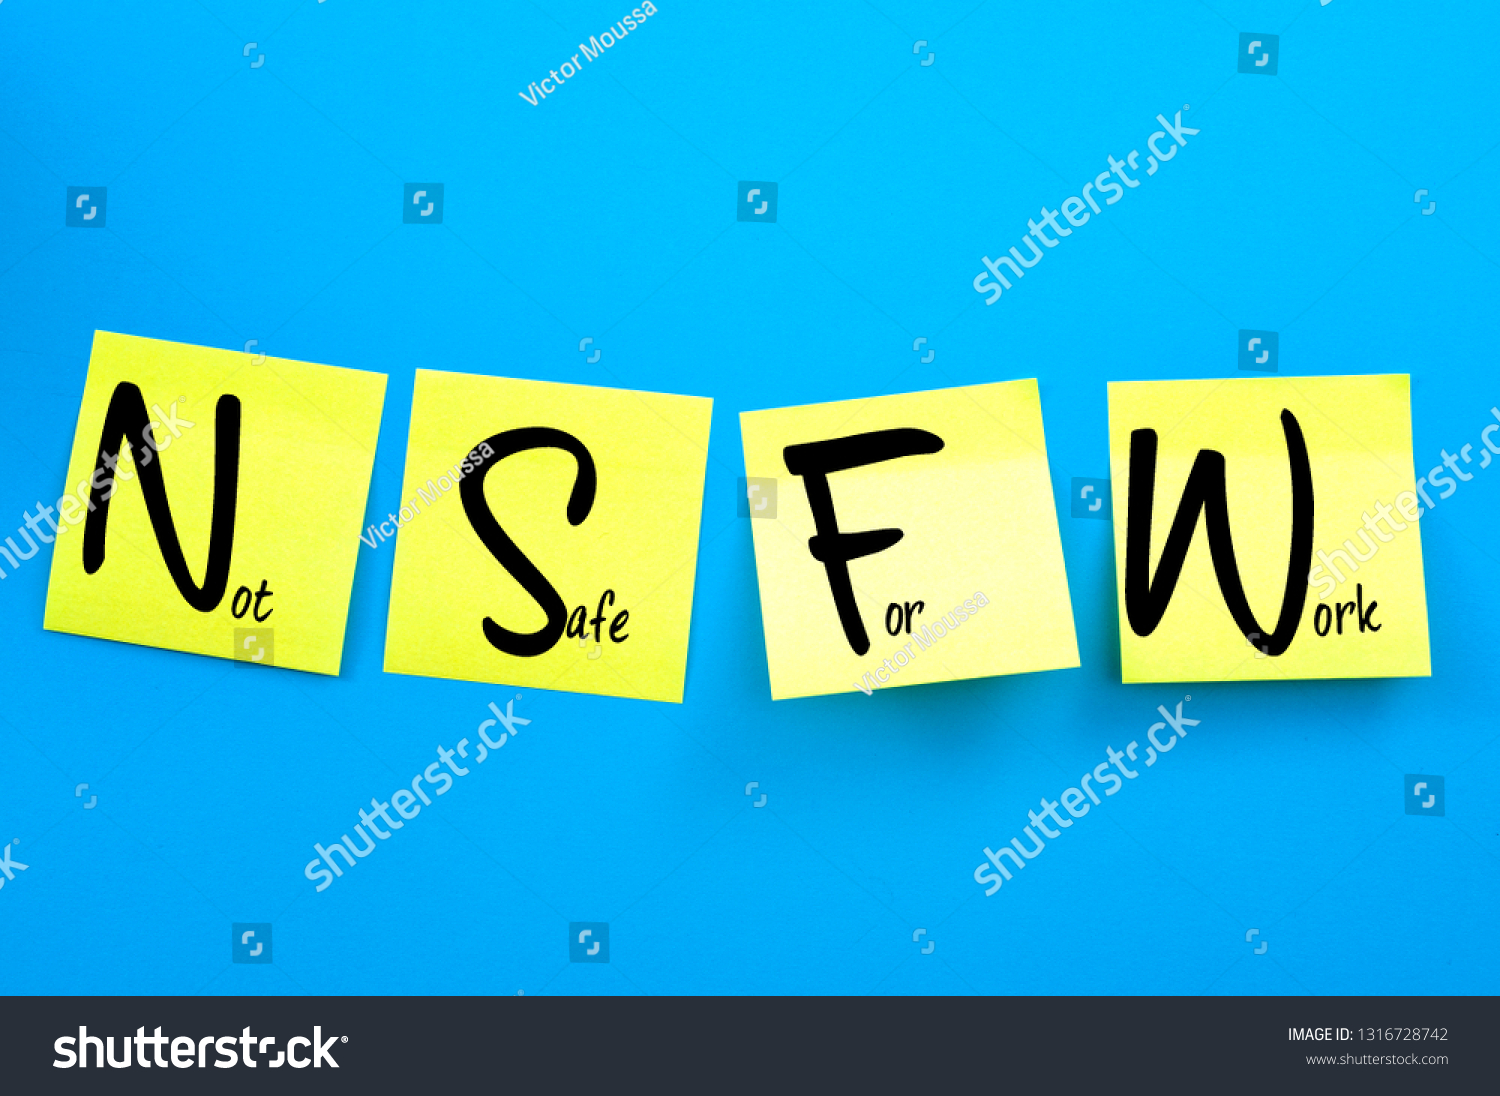 Internet slang, not safe for work or not suitable for workplace concept theme with yellow adhesive stickers spelling out the acronym NSFW attached to a blue background message board #1316728742